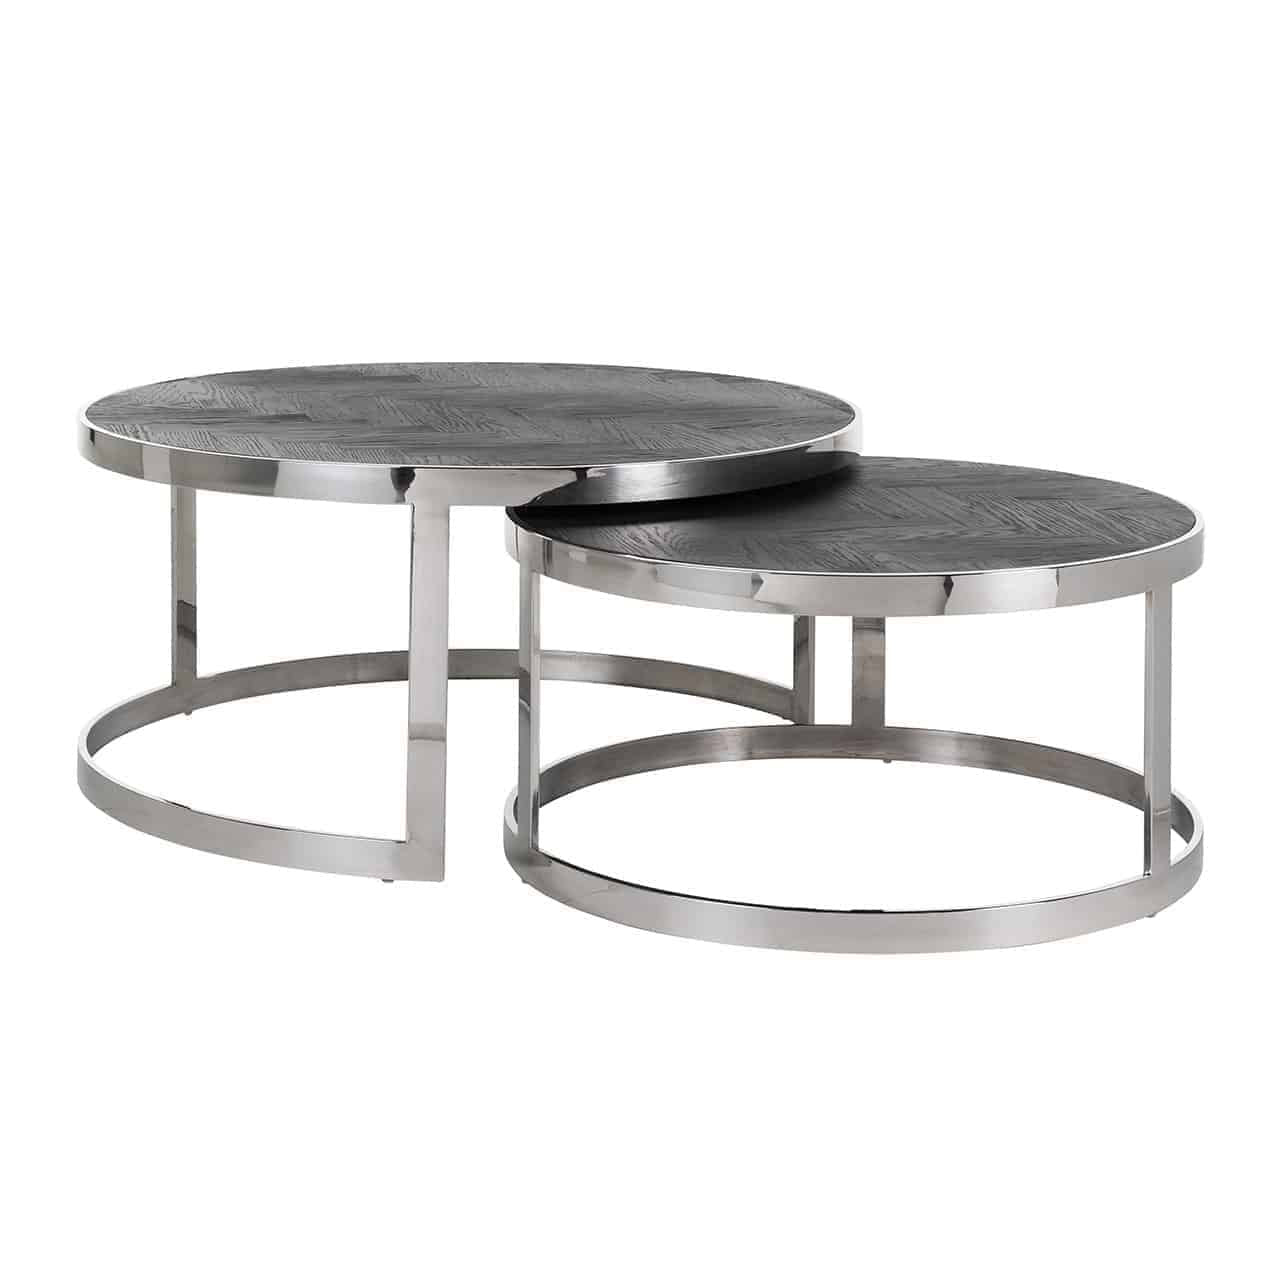 Arundel Silver Nest of 2 Coffee Tables - Pavilion Interiors